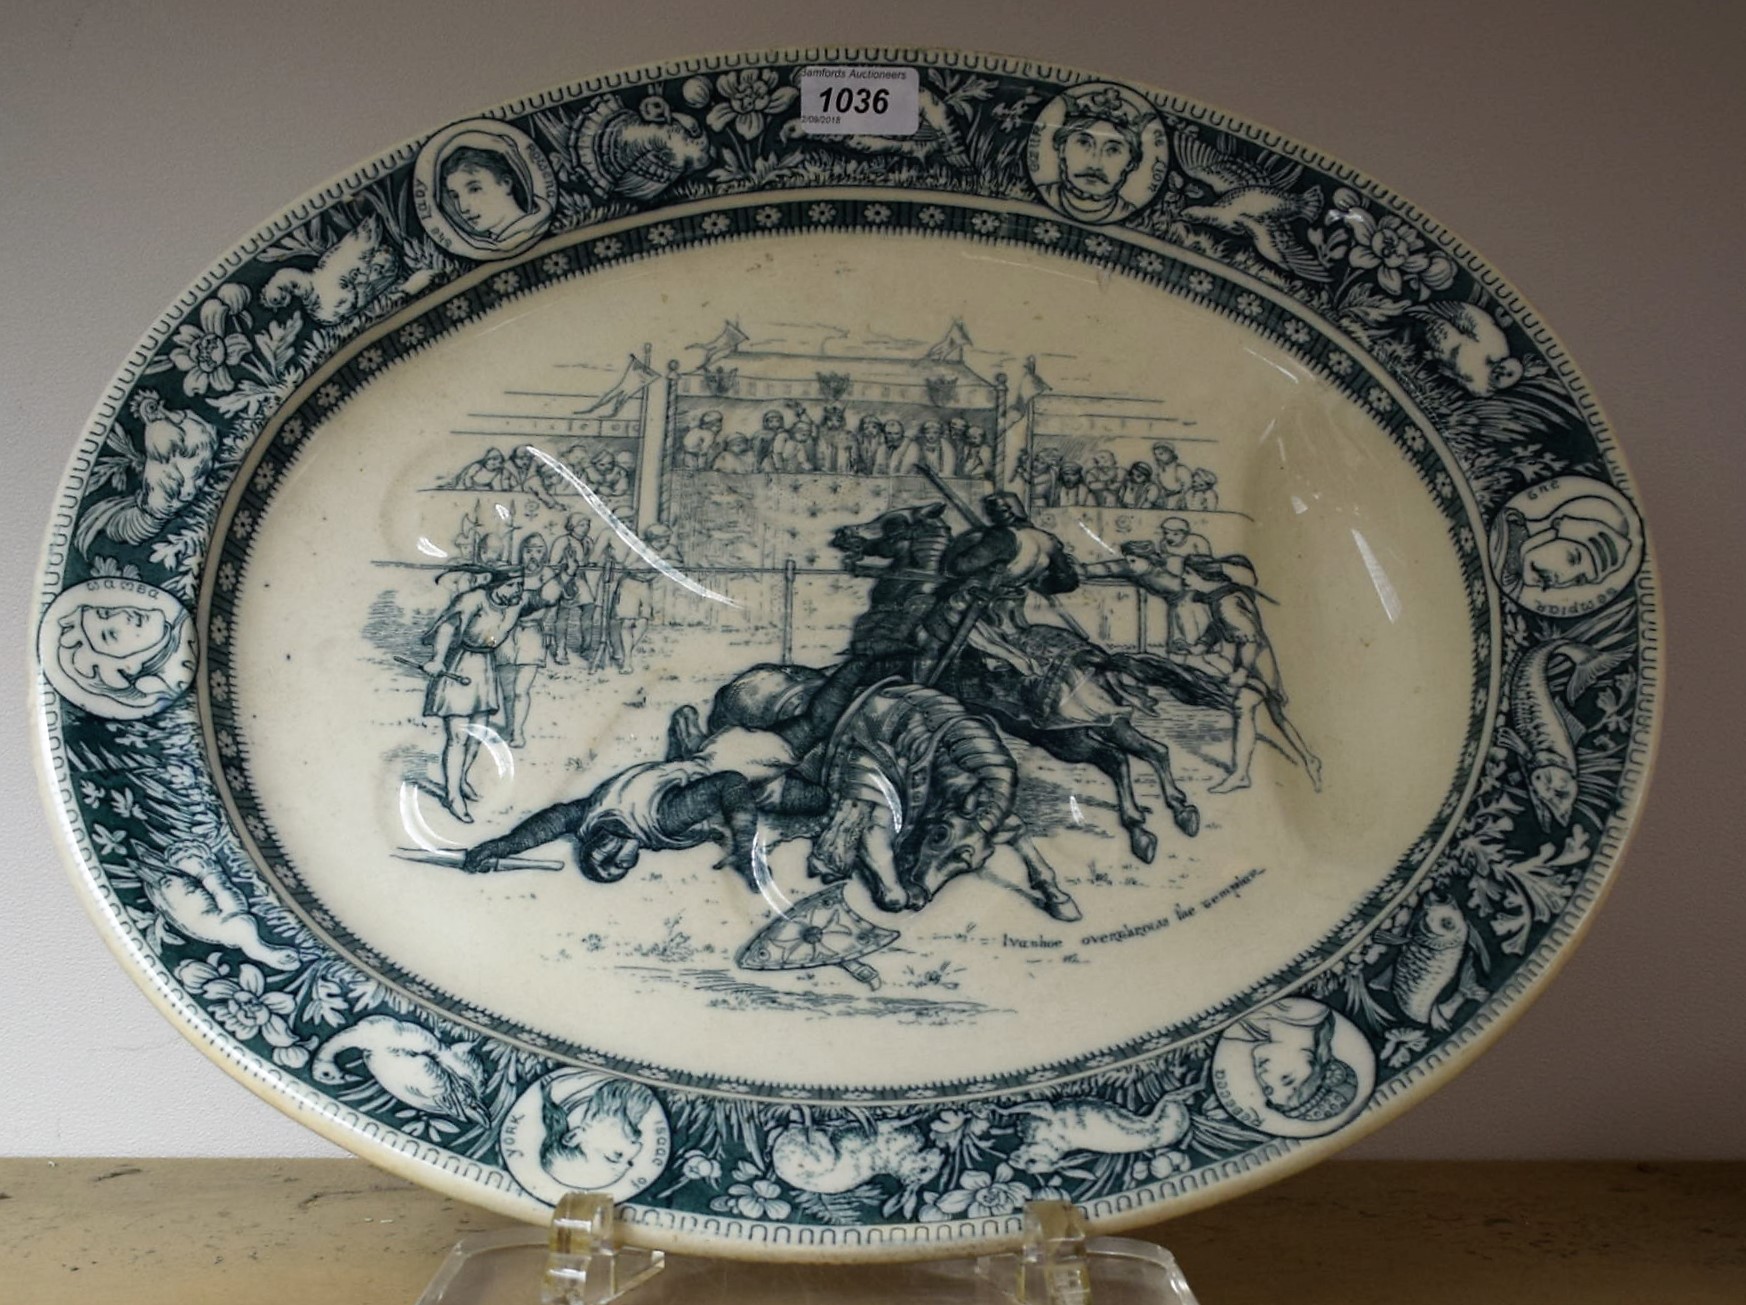 An unusual late 19th century Wedgwood Ivanhoe pattern oval meat plate,